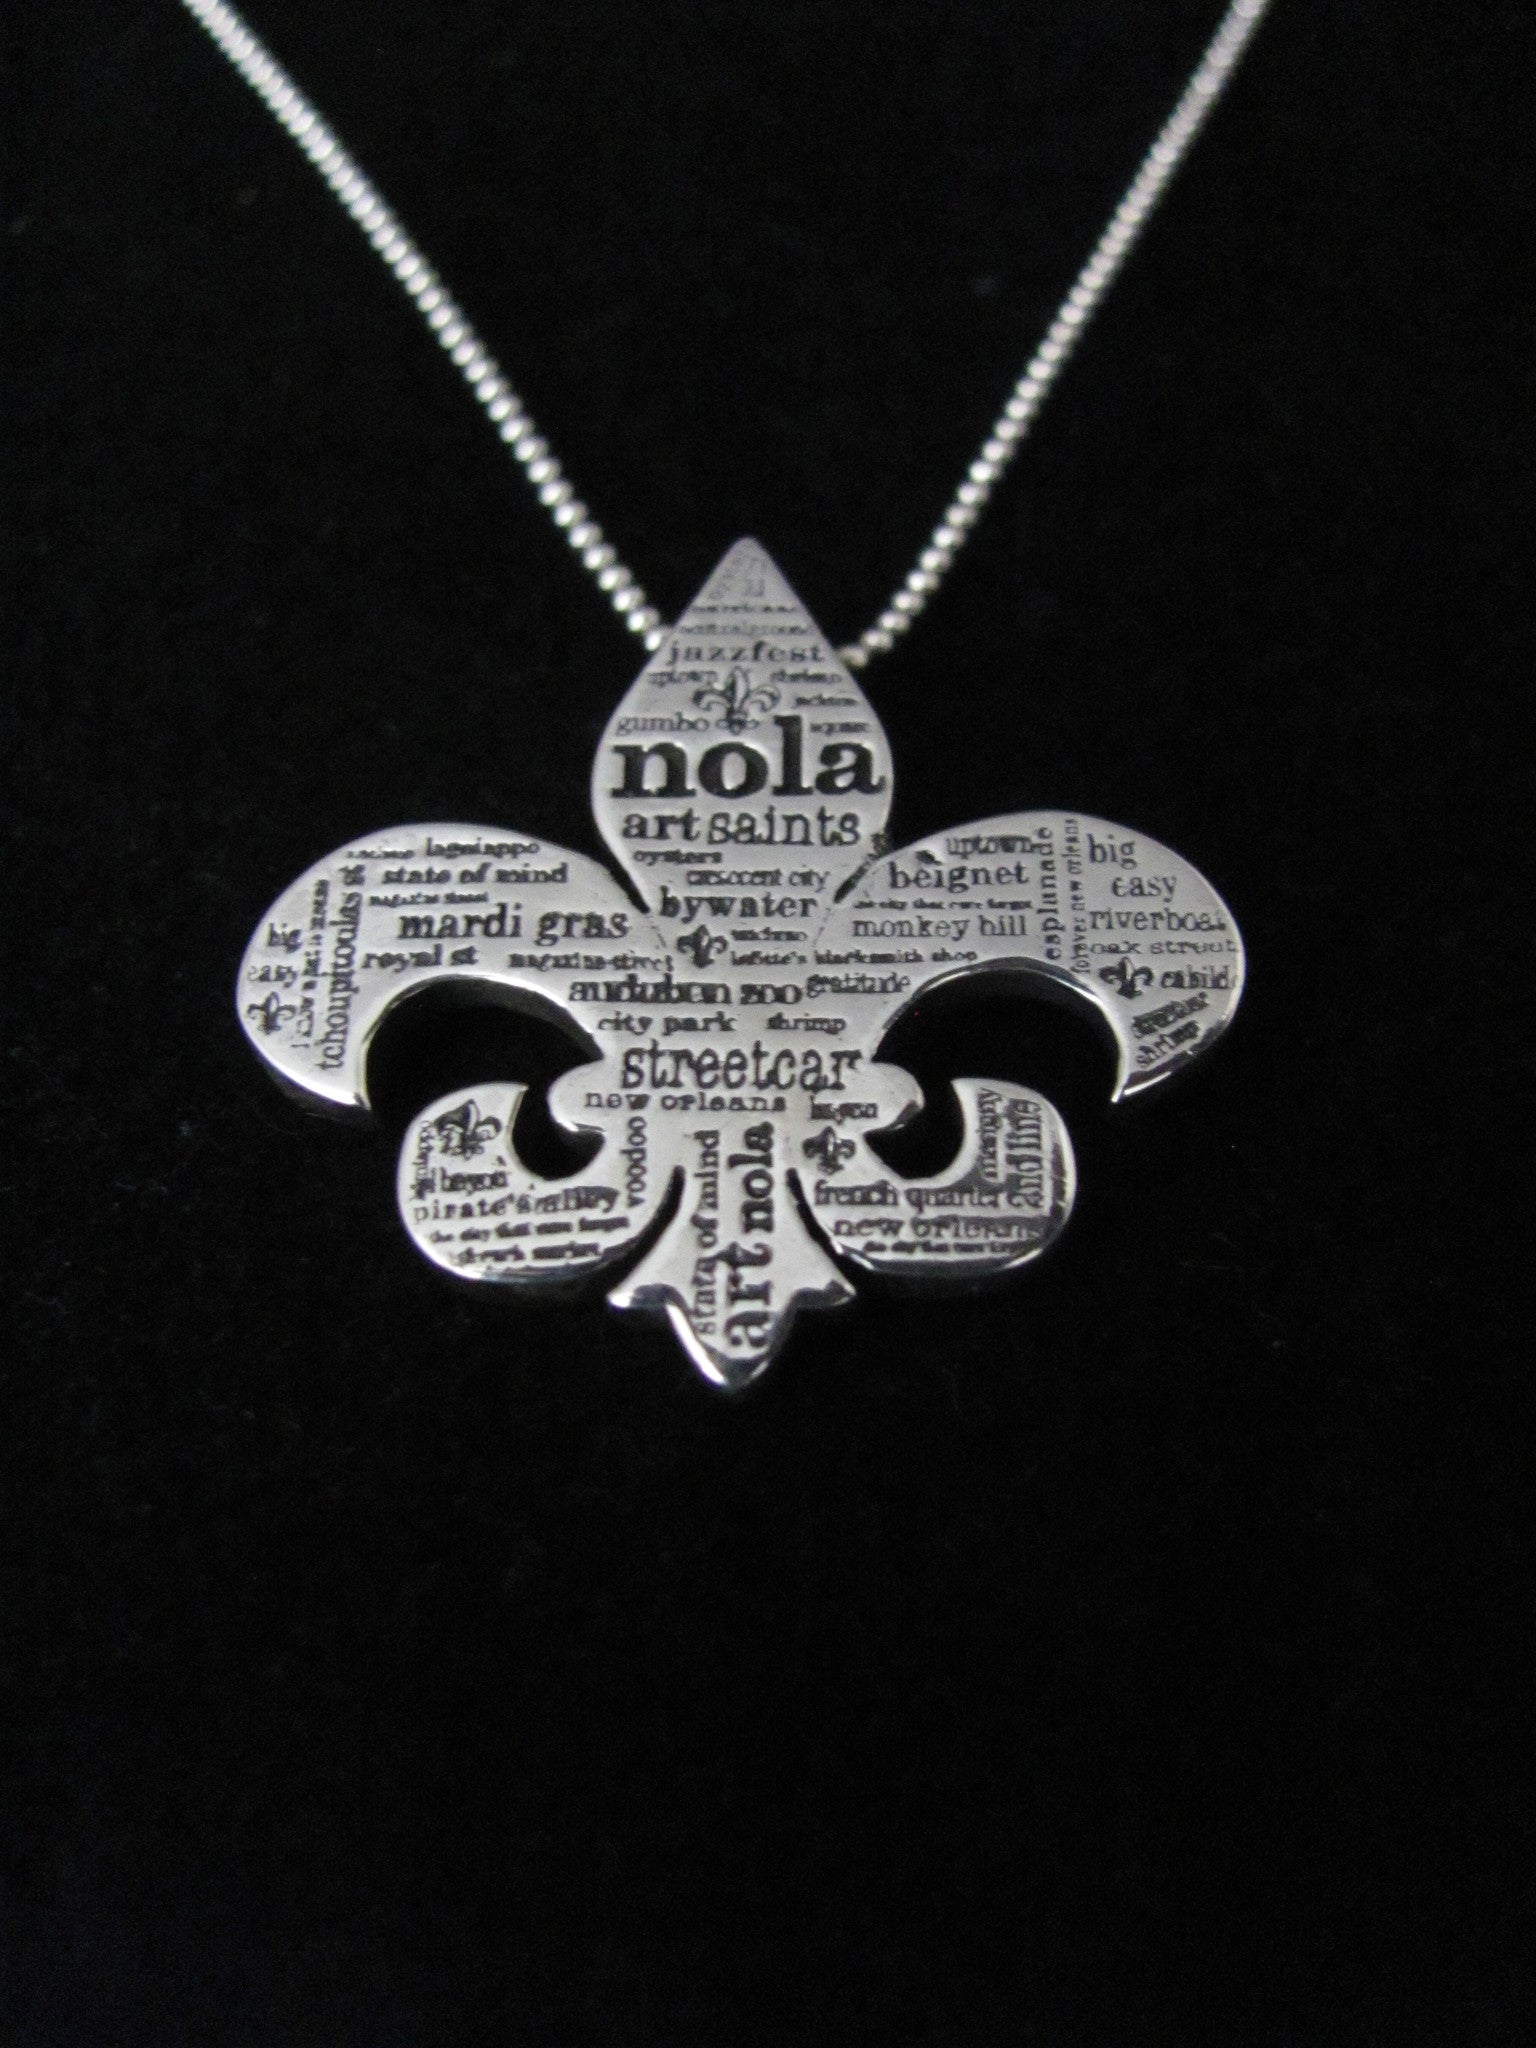 State of Mind Necklace - Louisiana